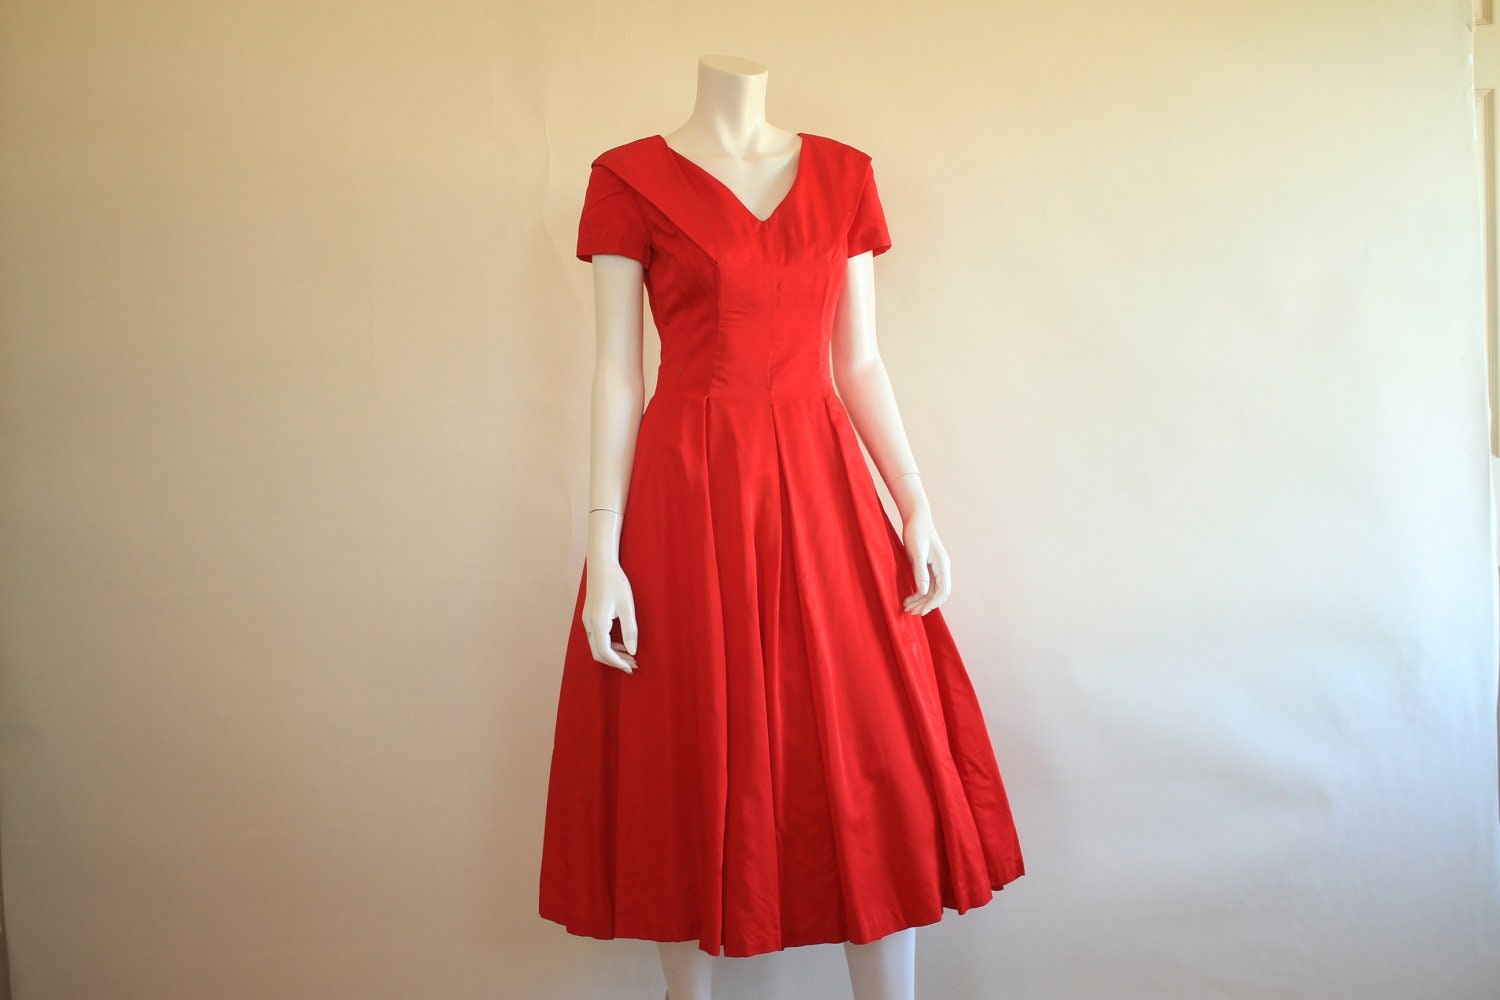 Vintage 1950s Dress /  50s Holiday Red Taffeta / New Look / Rockabilly / Audrey / S - ladyscarletts